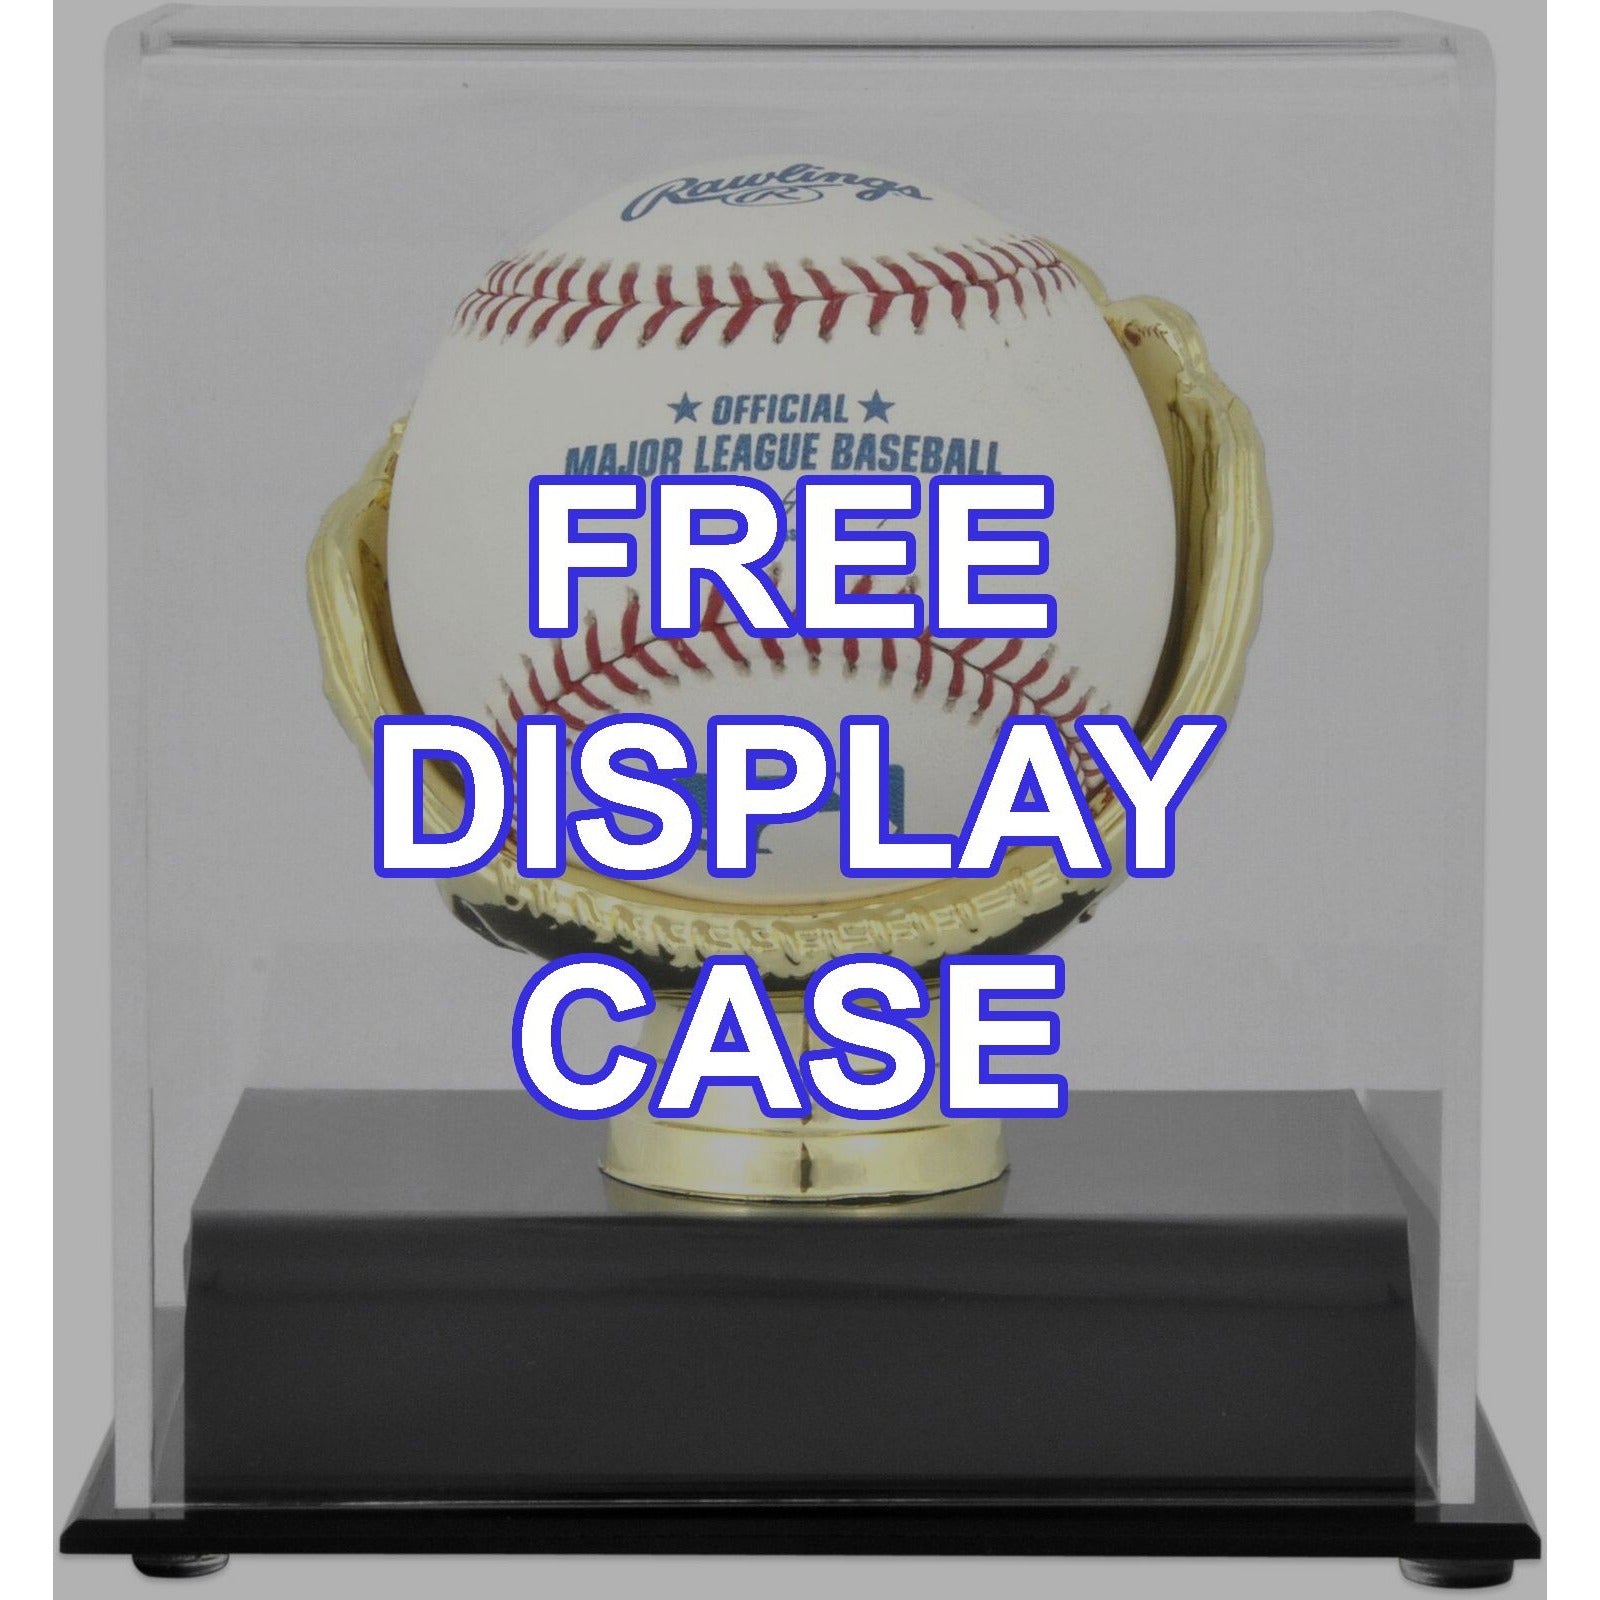 Derek Jeter Robinson canoe Alex Rodriguez Mark Teixeira official MLB baseball signed with proof free acrylic display case